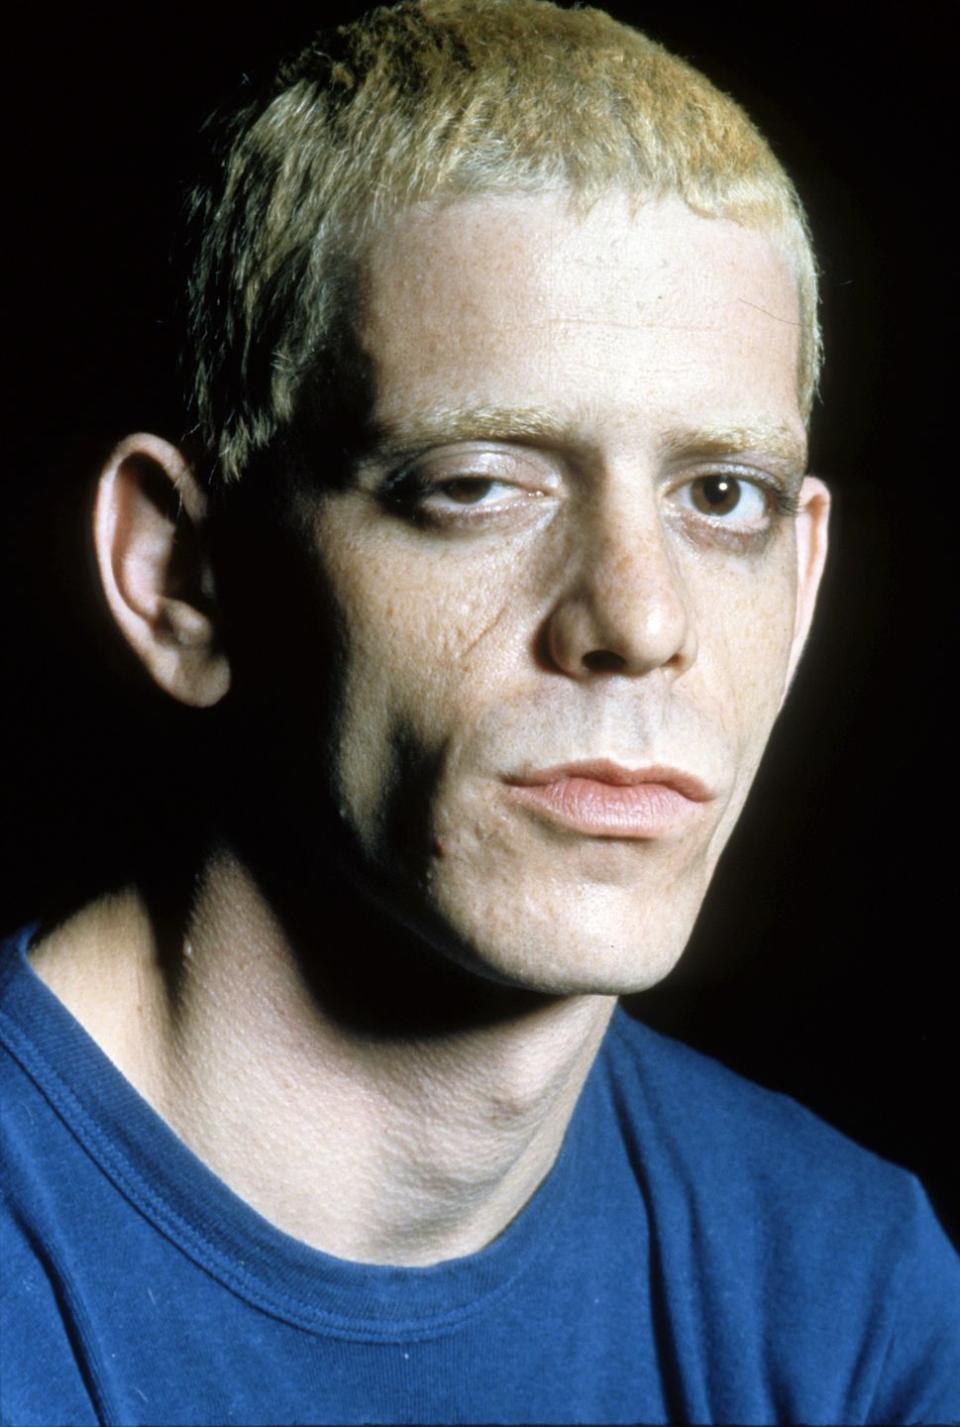 lou reed stares at the camera, he wears a blue shirt